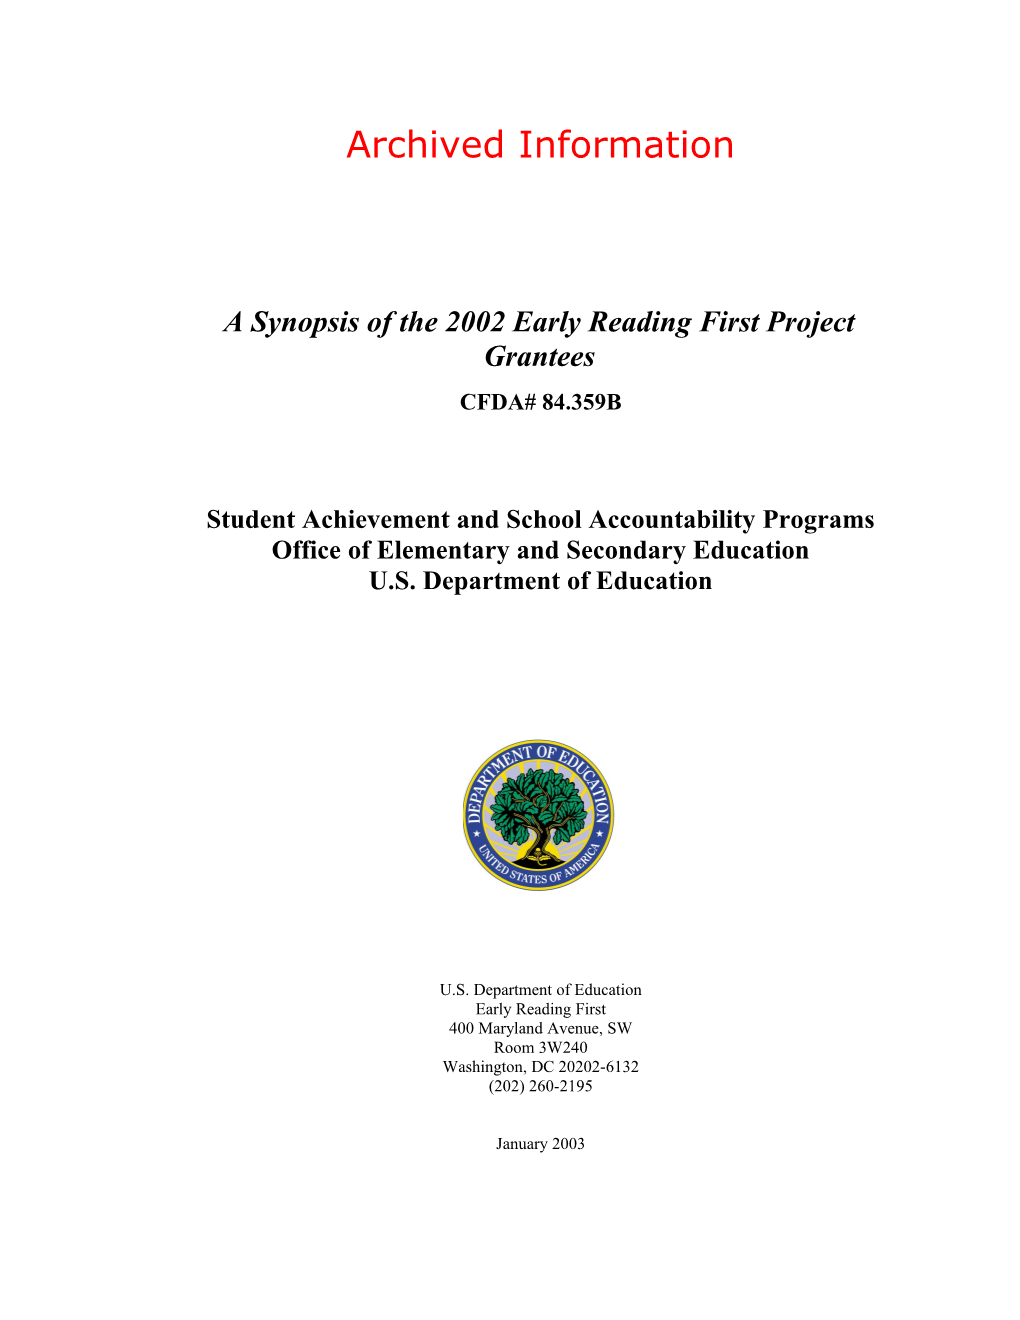 Archived: a Synopsis of the 2002 Early Reading First Project Grantees (MSWORD)